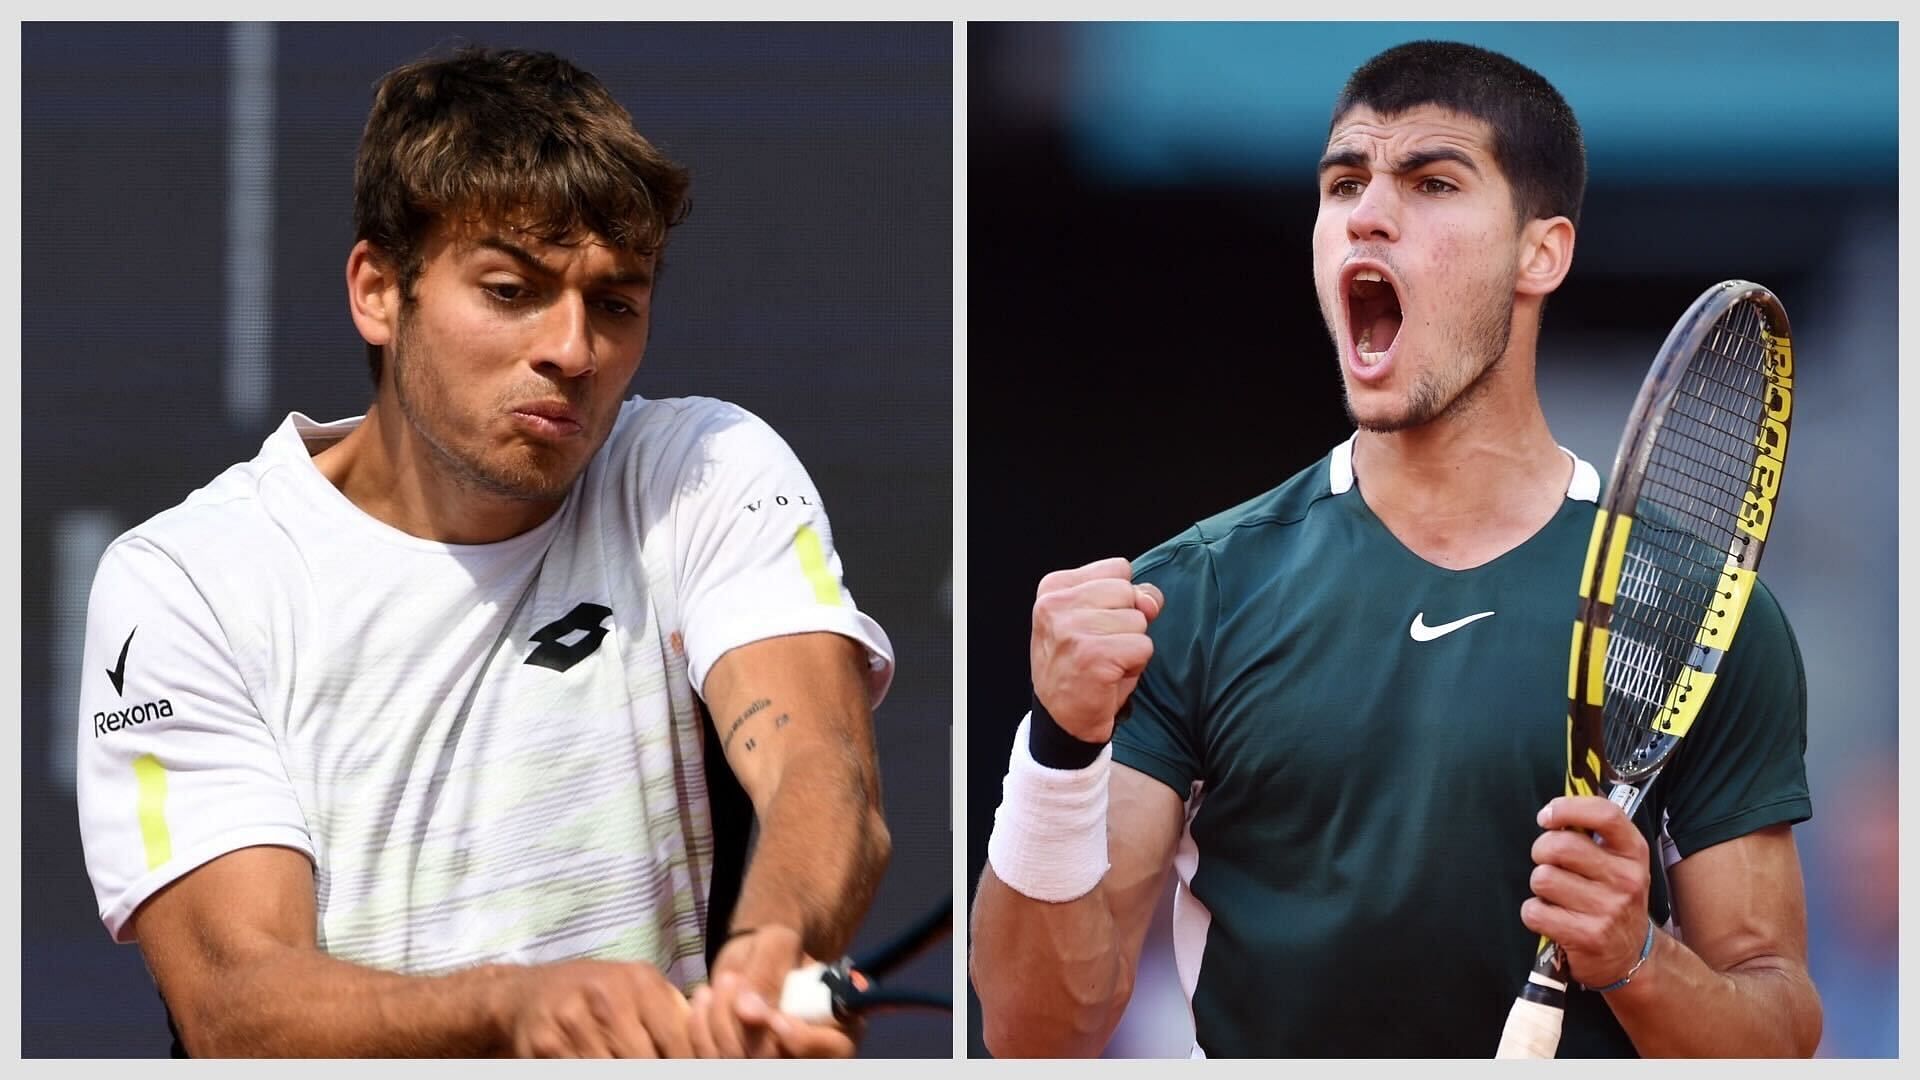 Flavio Cobolli vs Carlos Alcaraz is one of the first-round matches at the French Open.